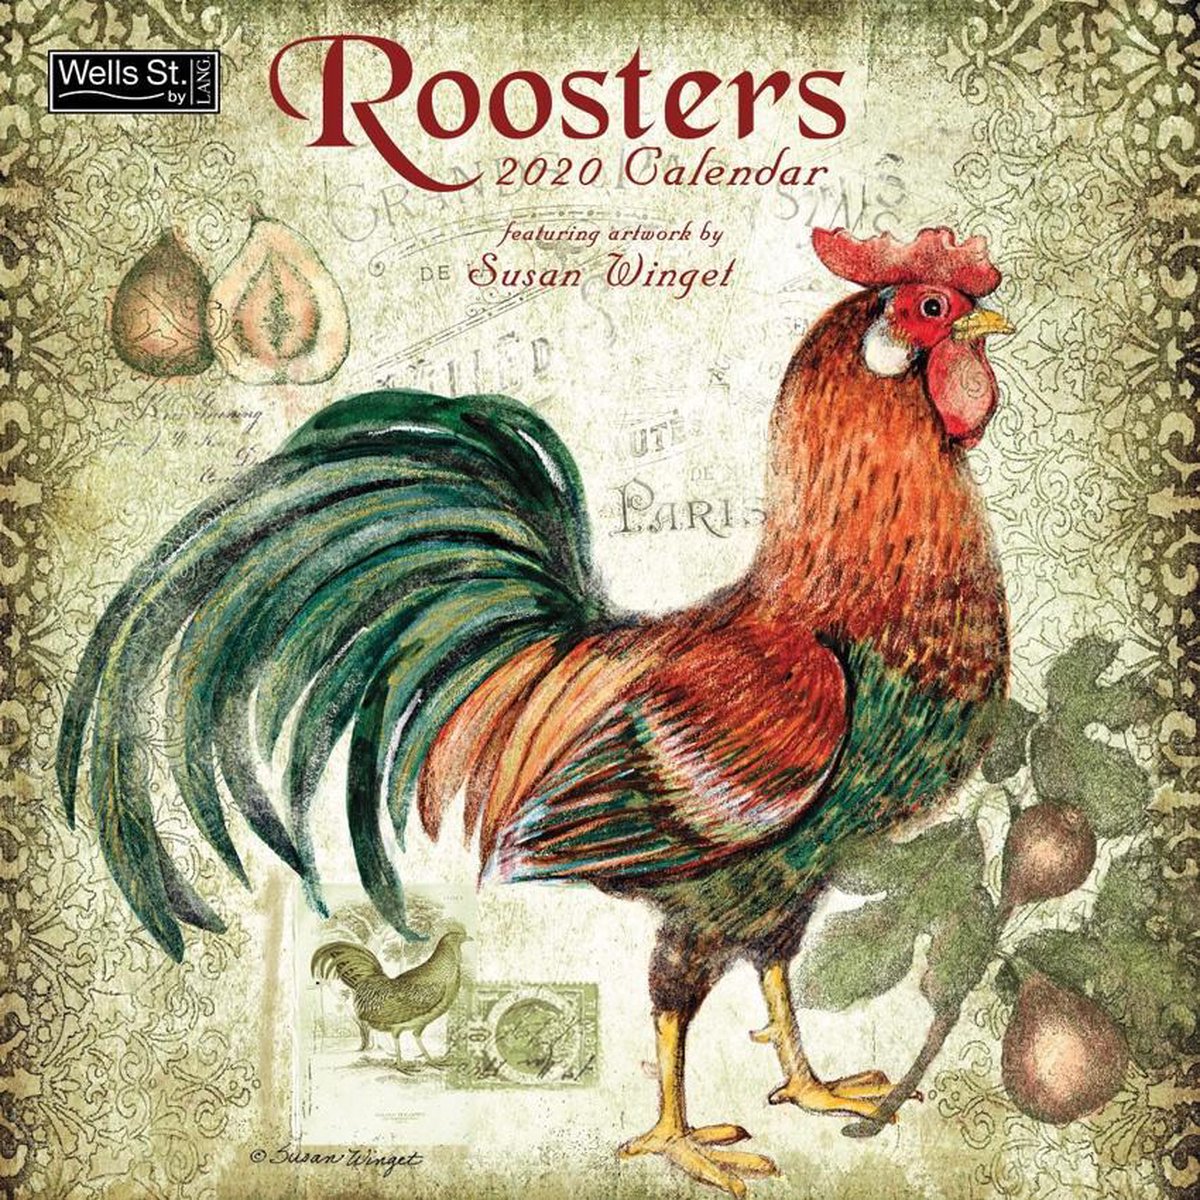 Roosters Kalender 2020 Wells St. by Lang